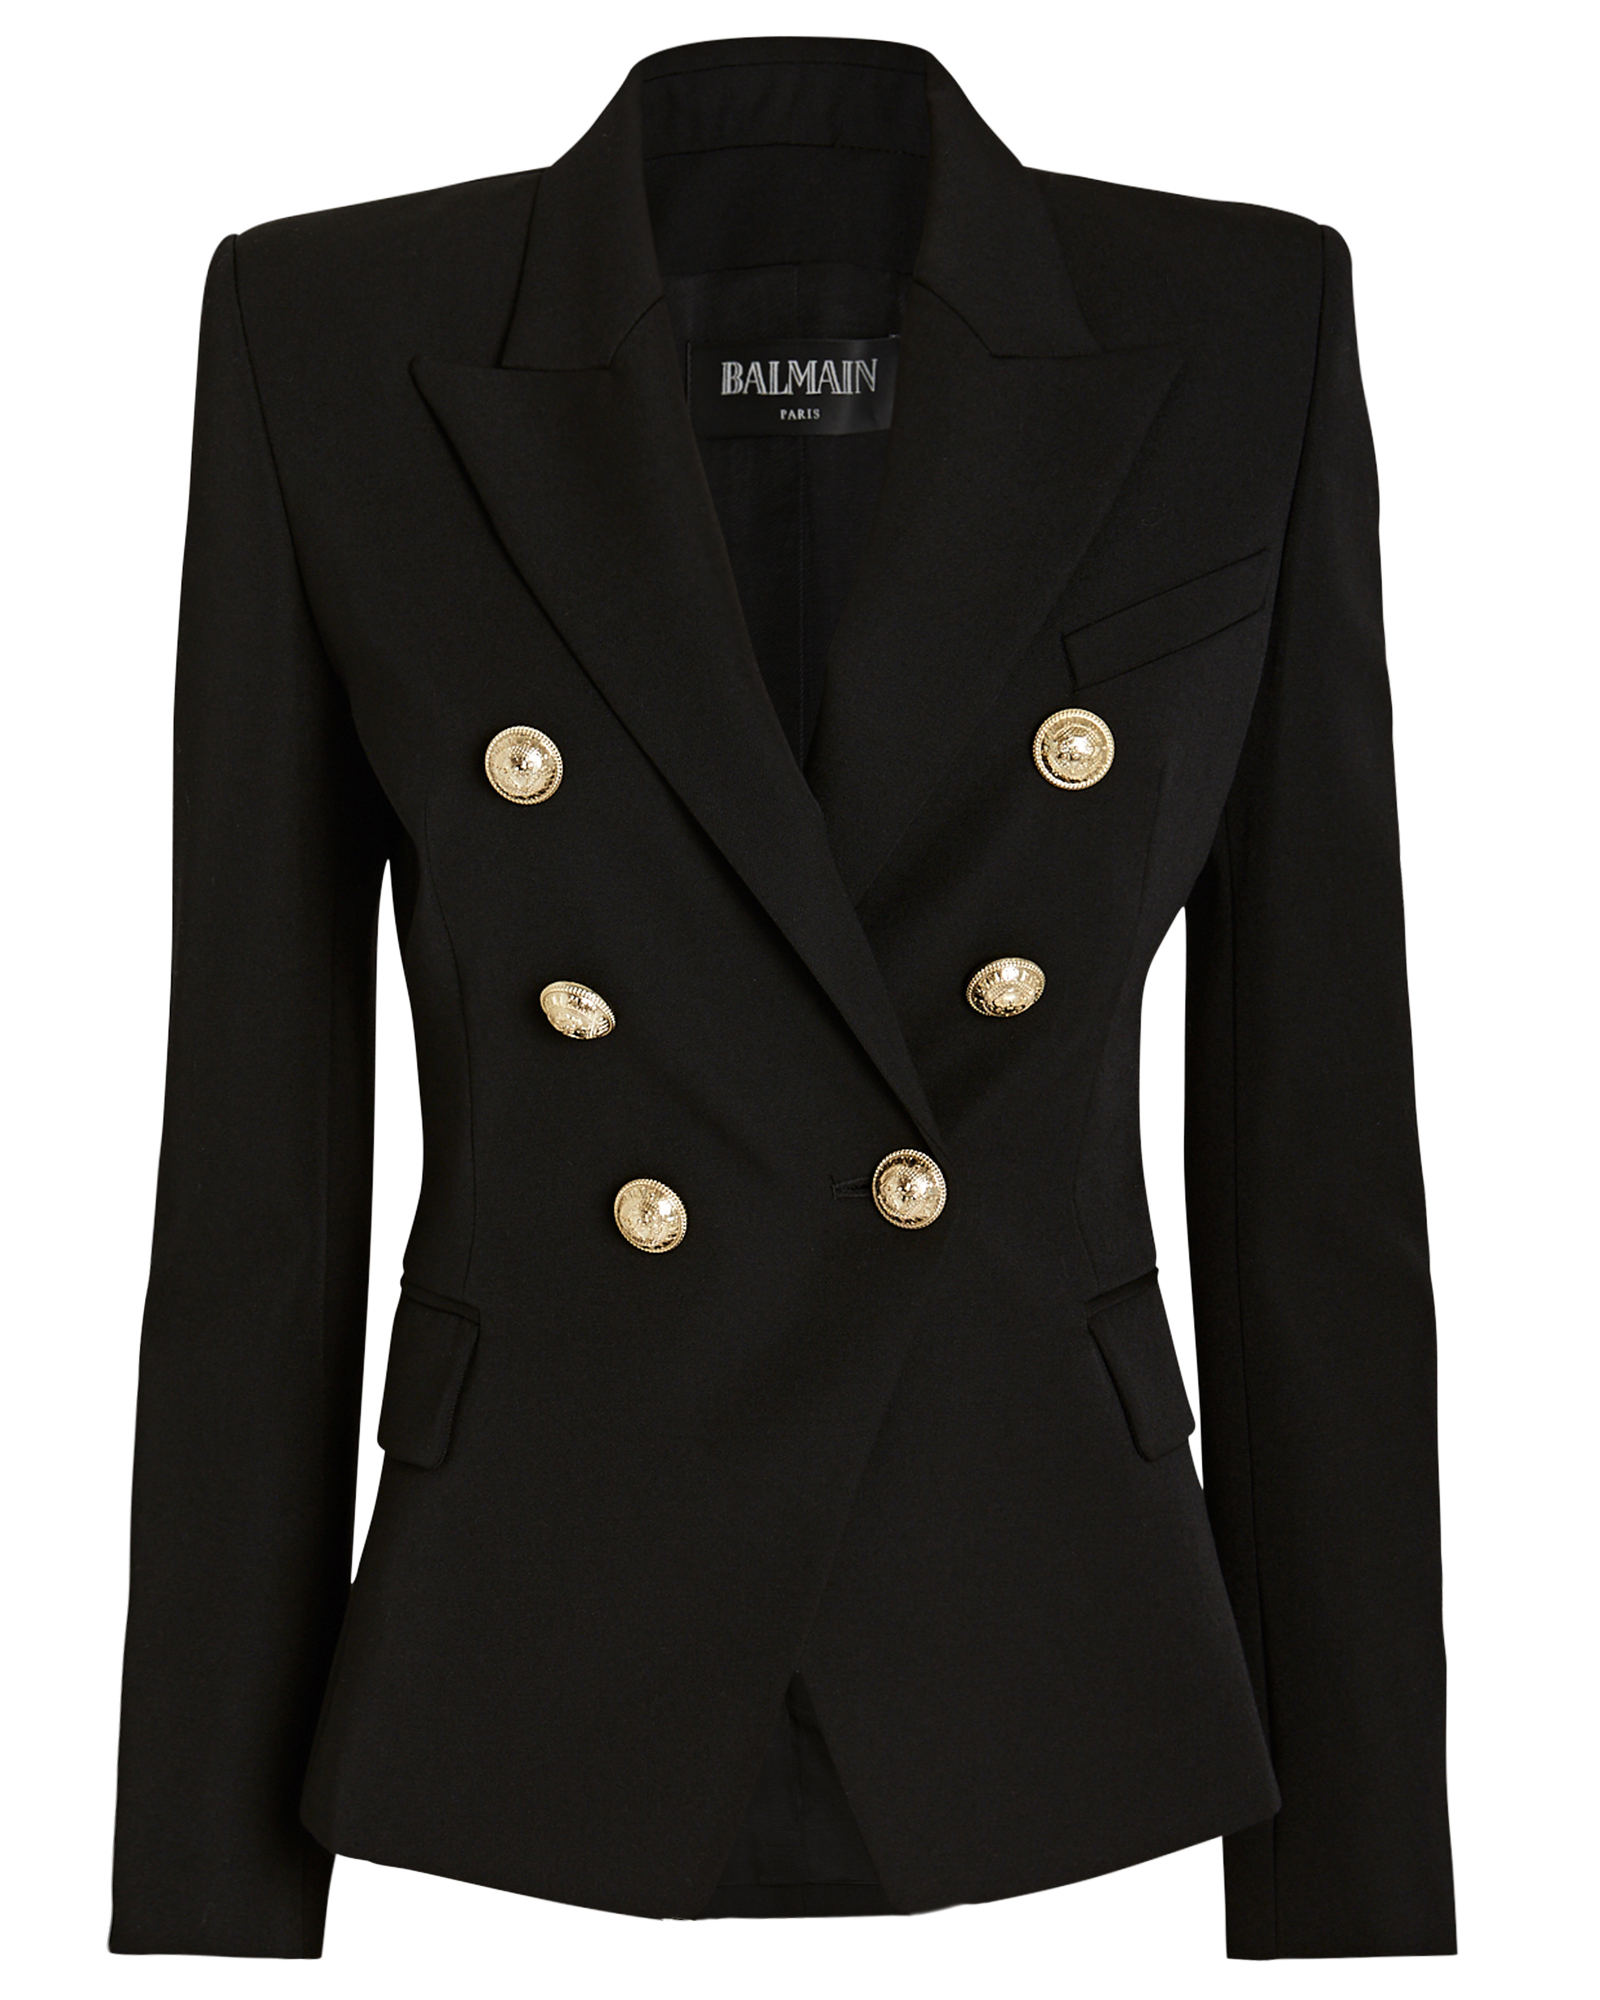 Balmain Double Breasted Suiting Blazer in black | INTERMIX®